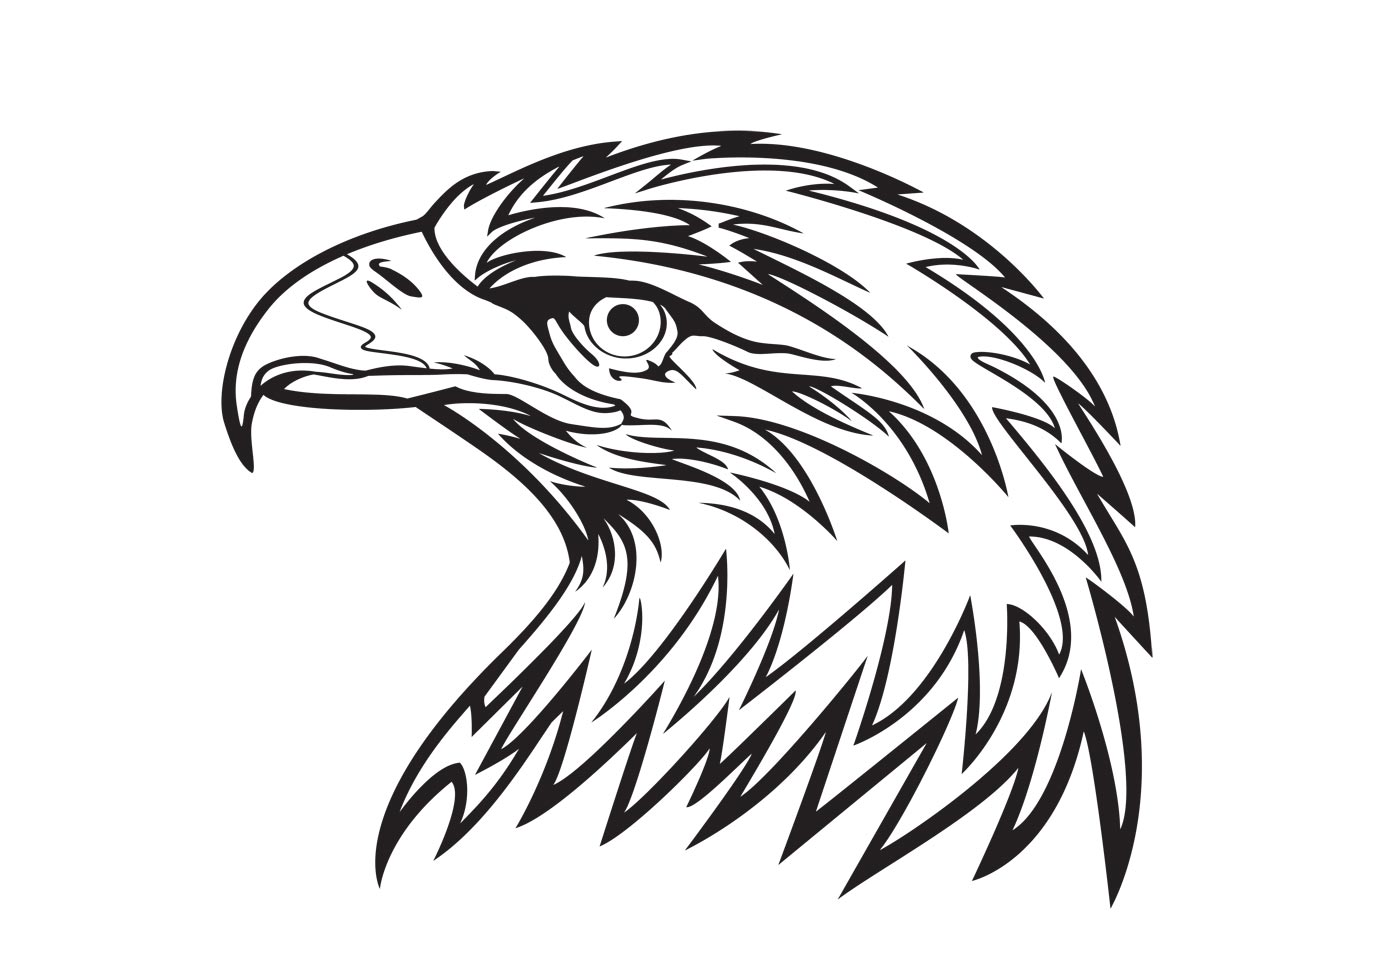 Eagle Free Vector Art - (2411 Free Downloads)